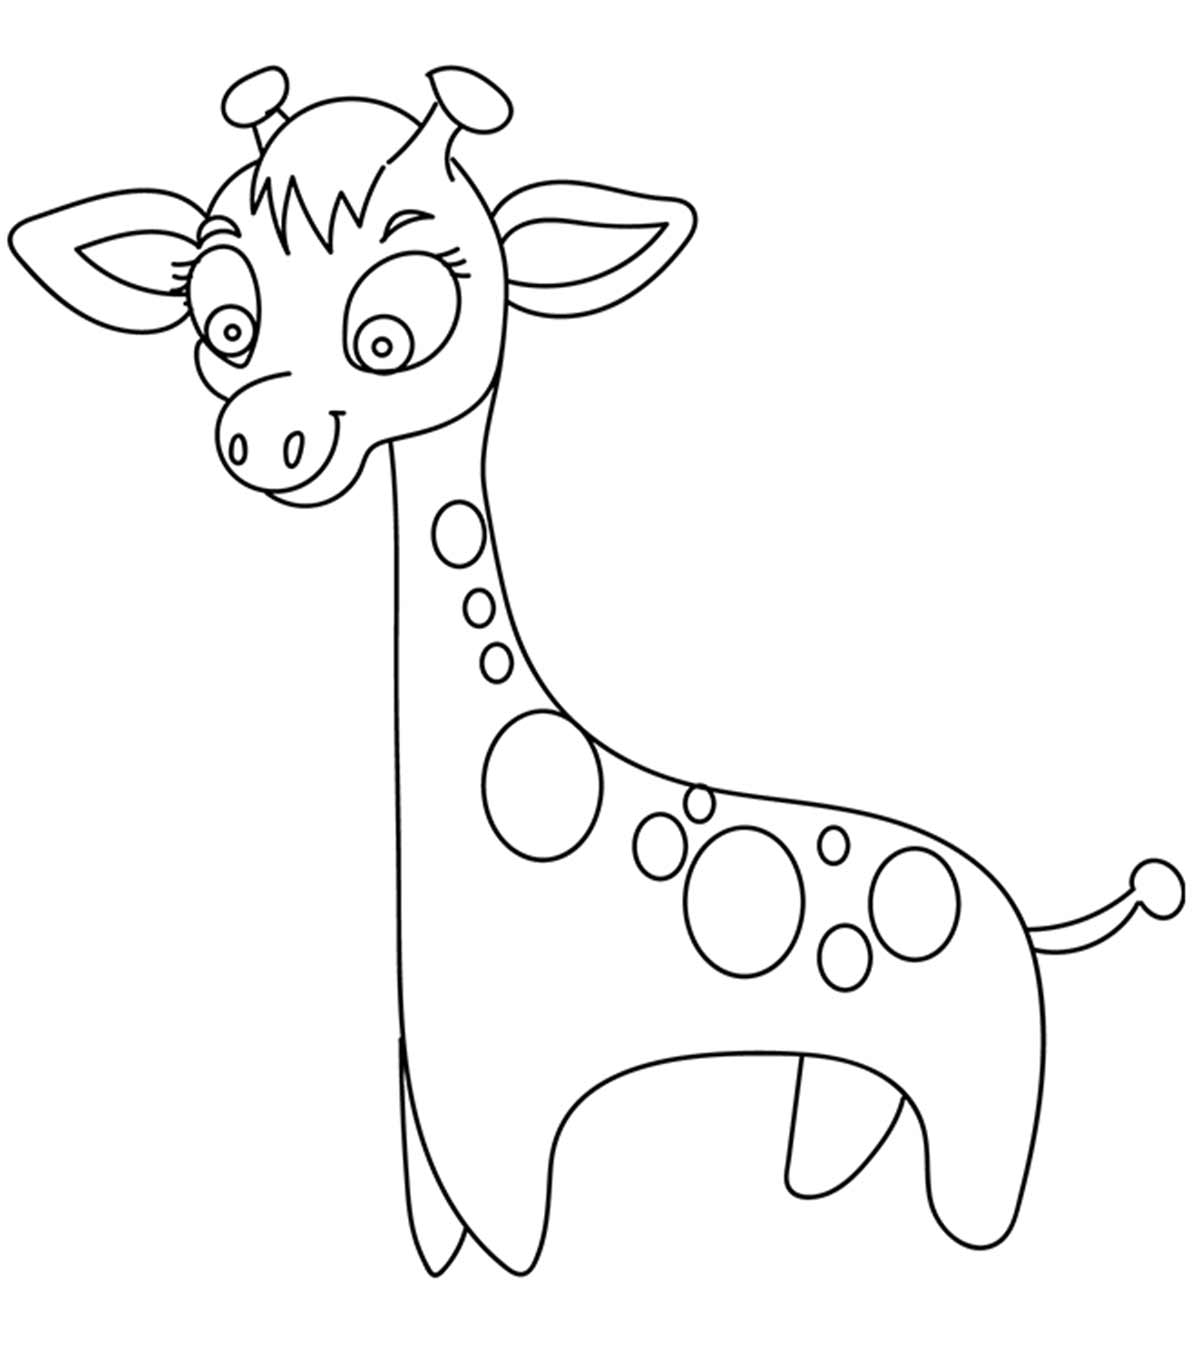 20 Cute Giraffe Coloring Pages For Your Toddlers